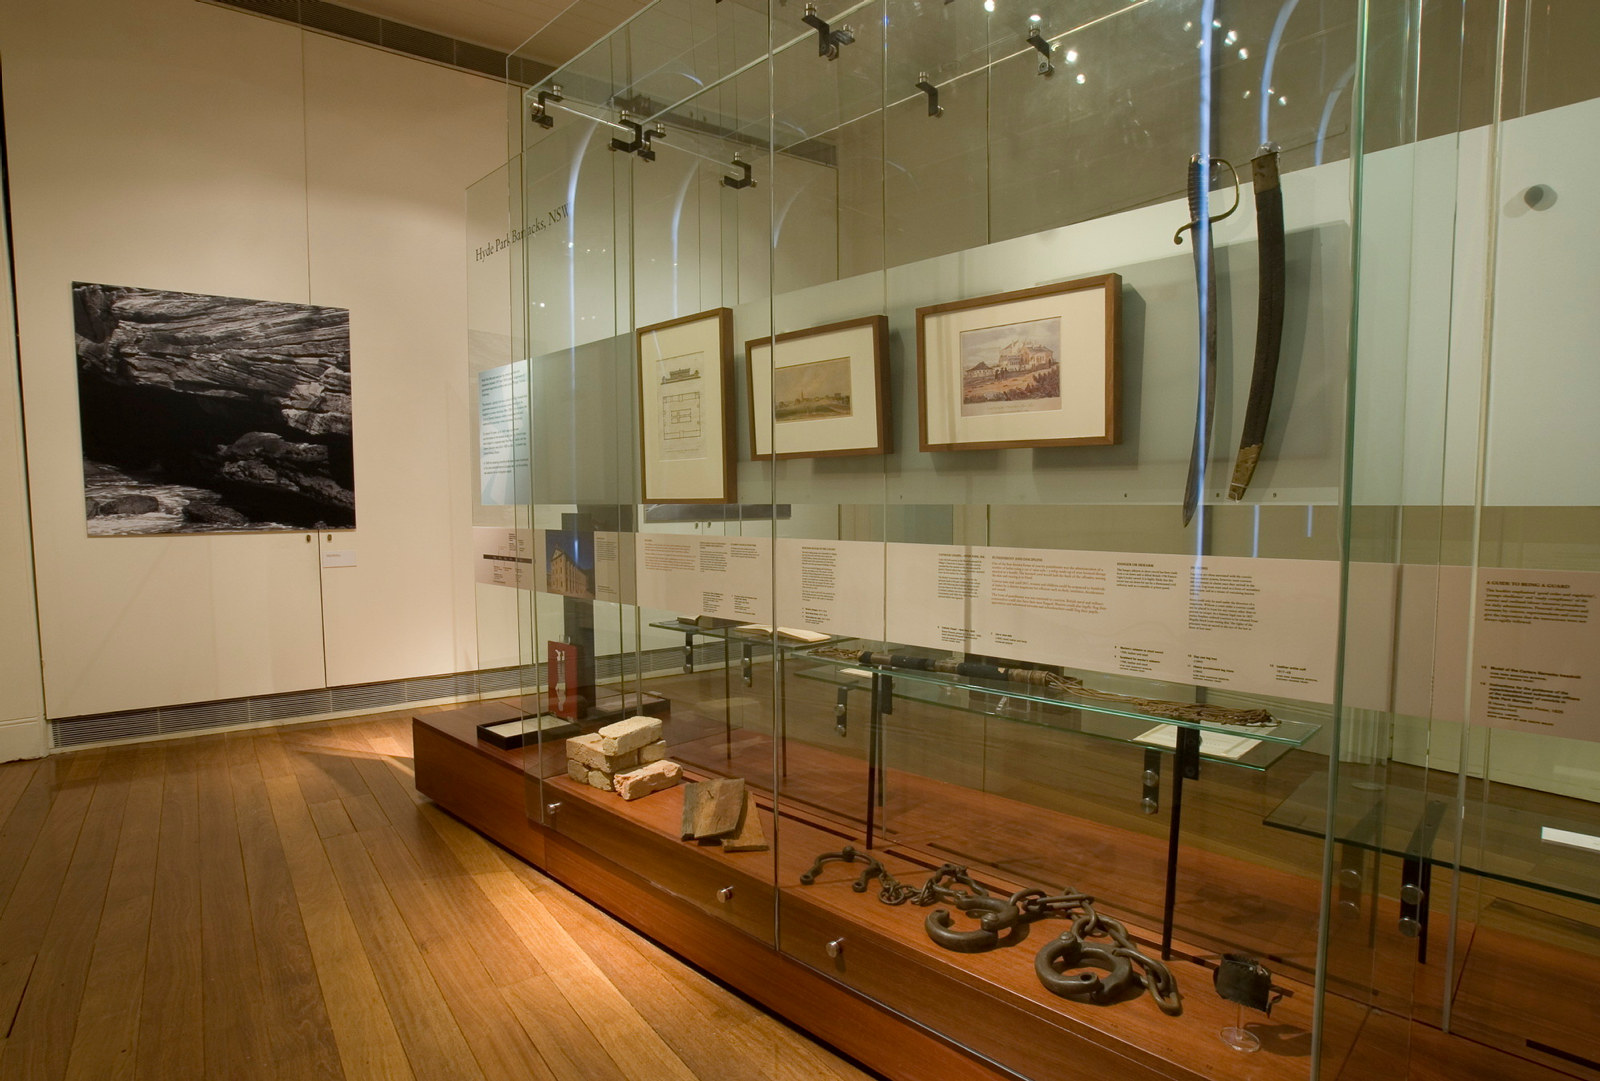 Documentation of Convicts: sites of punishment exhibition showing framed prints and multimedia